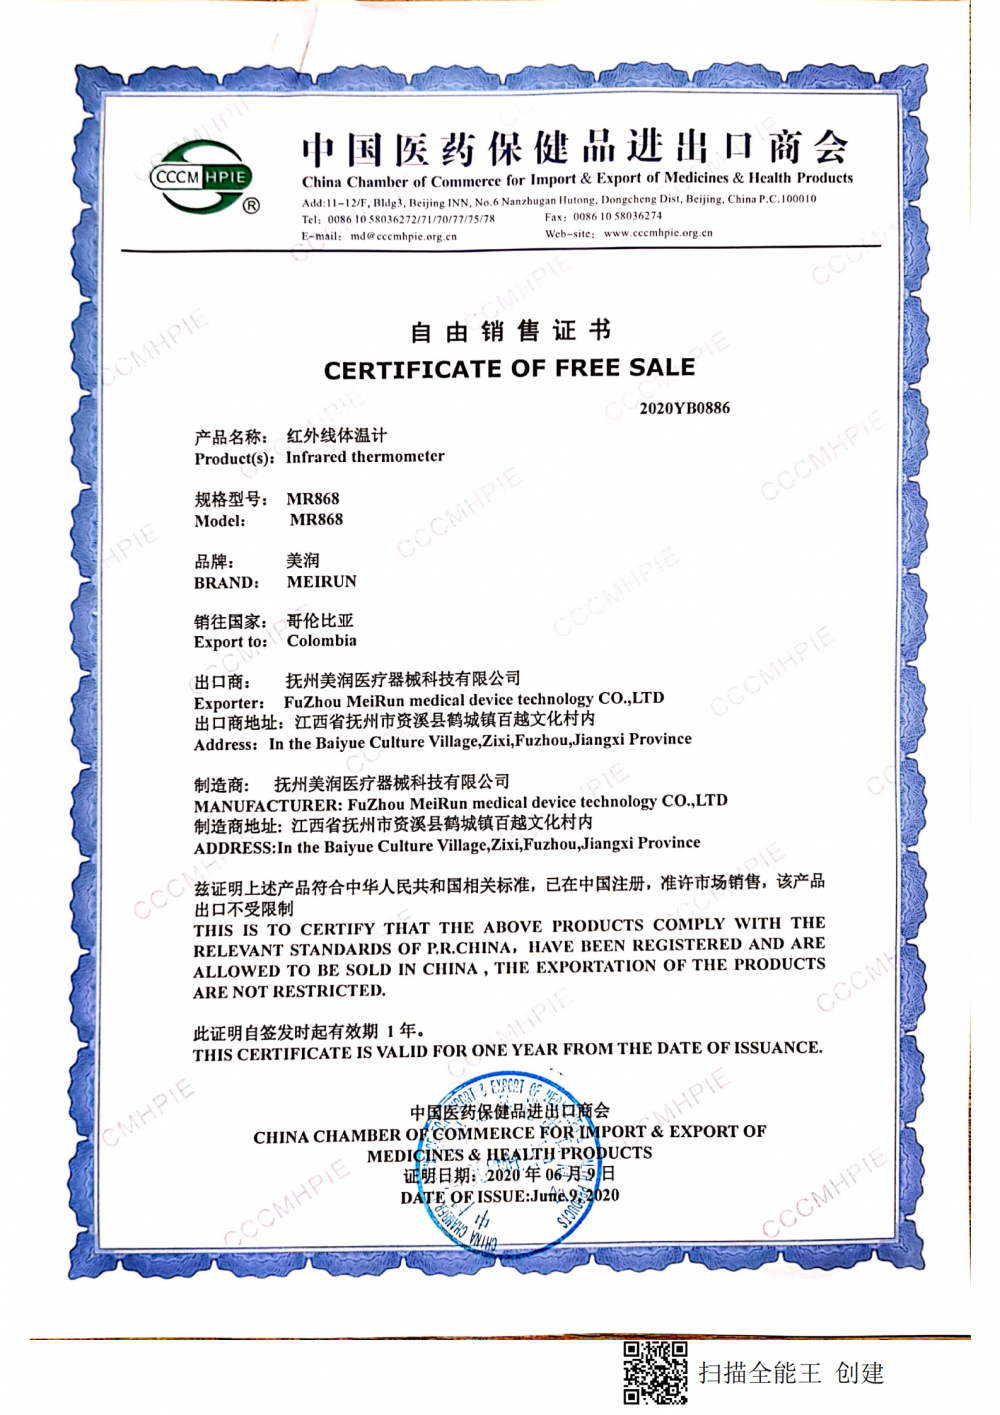 Free sale certificate - Colombia